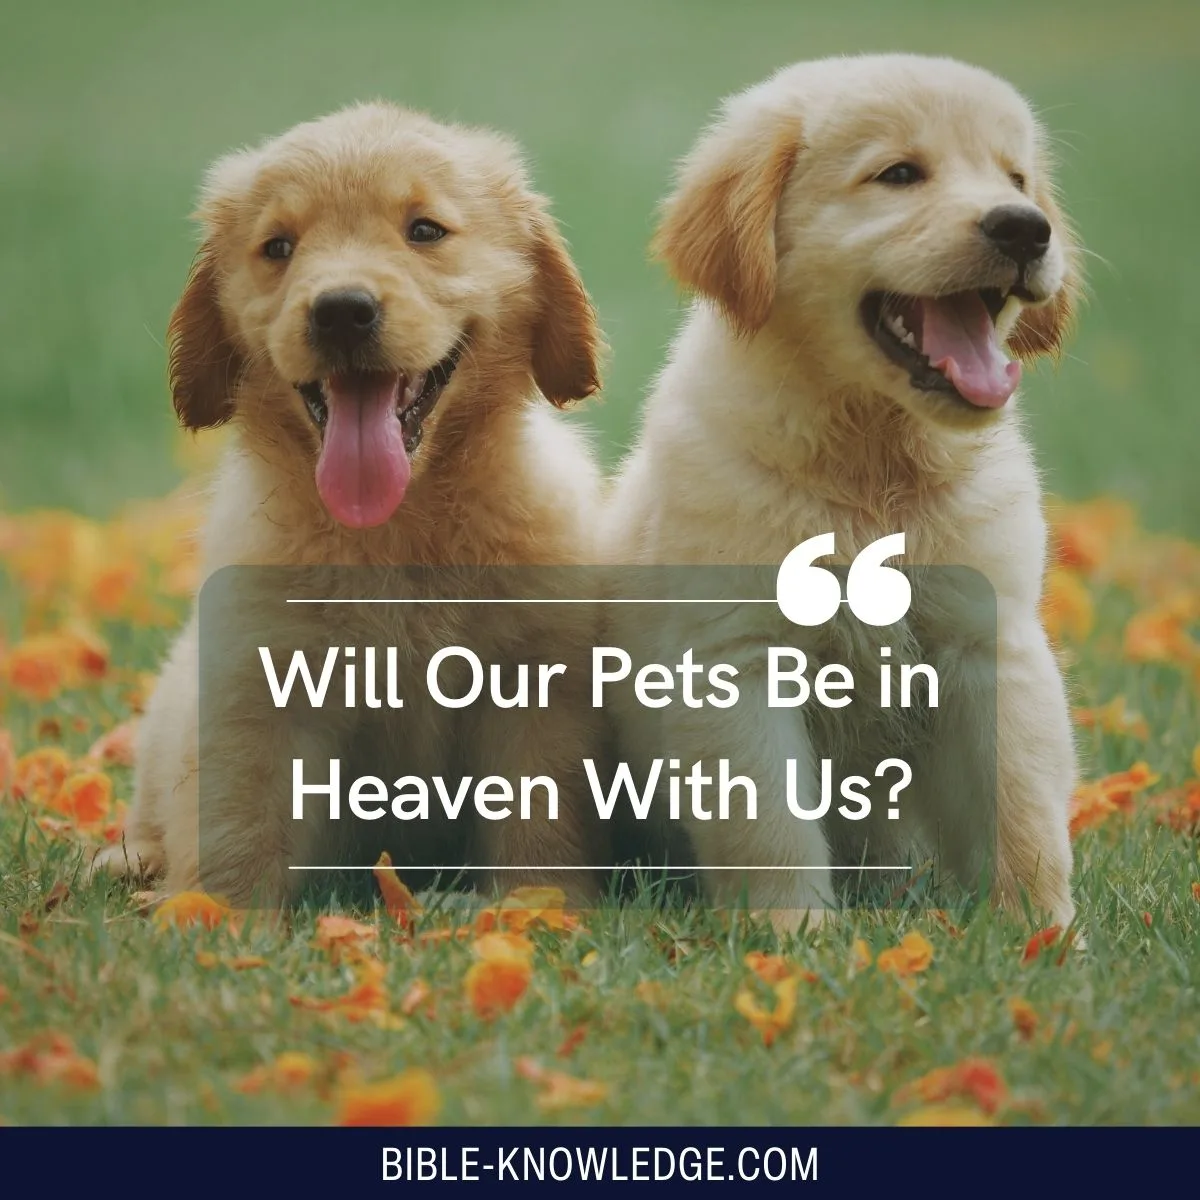 Will Our Pets Be in Heaven With Us